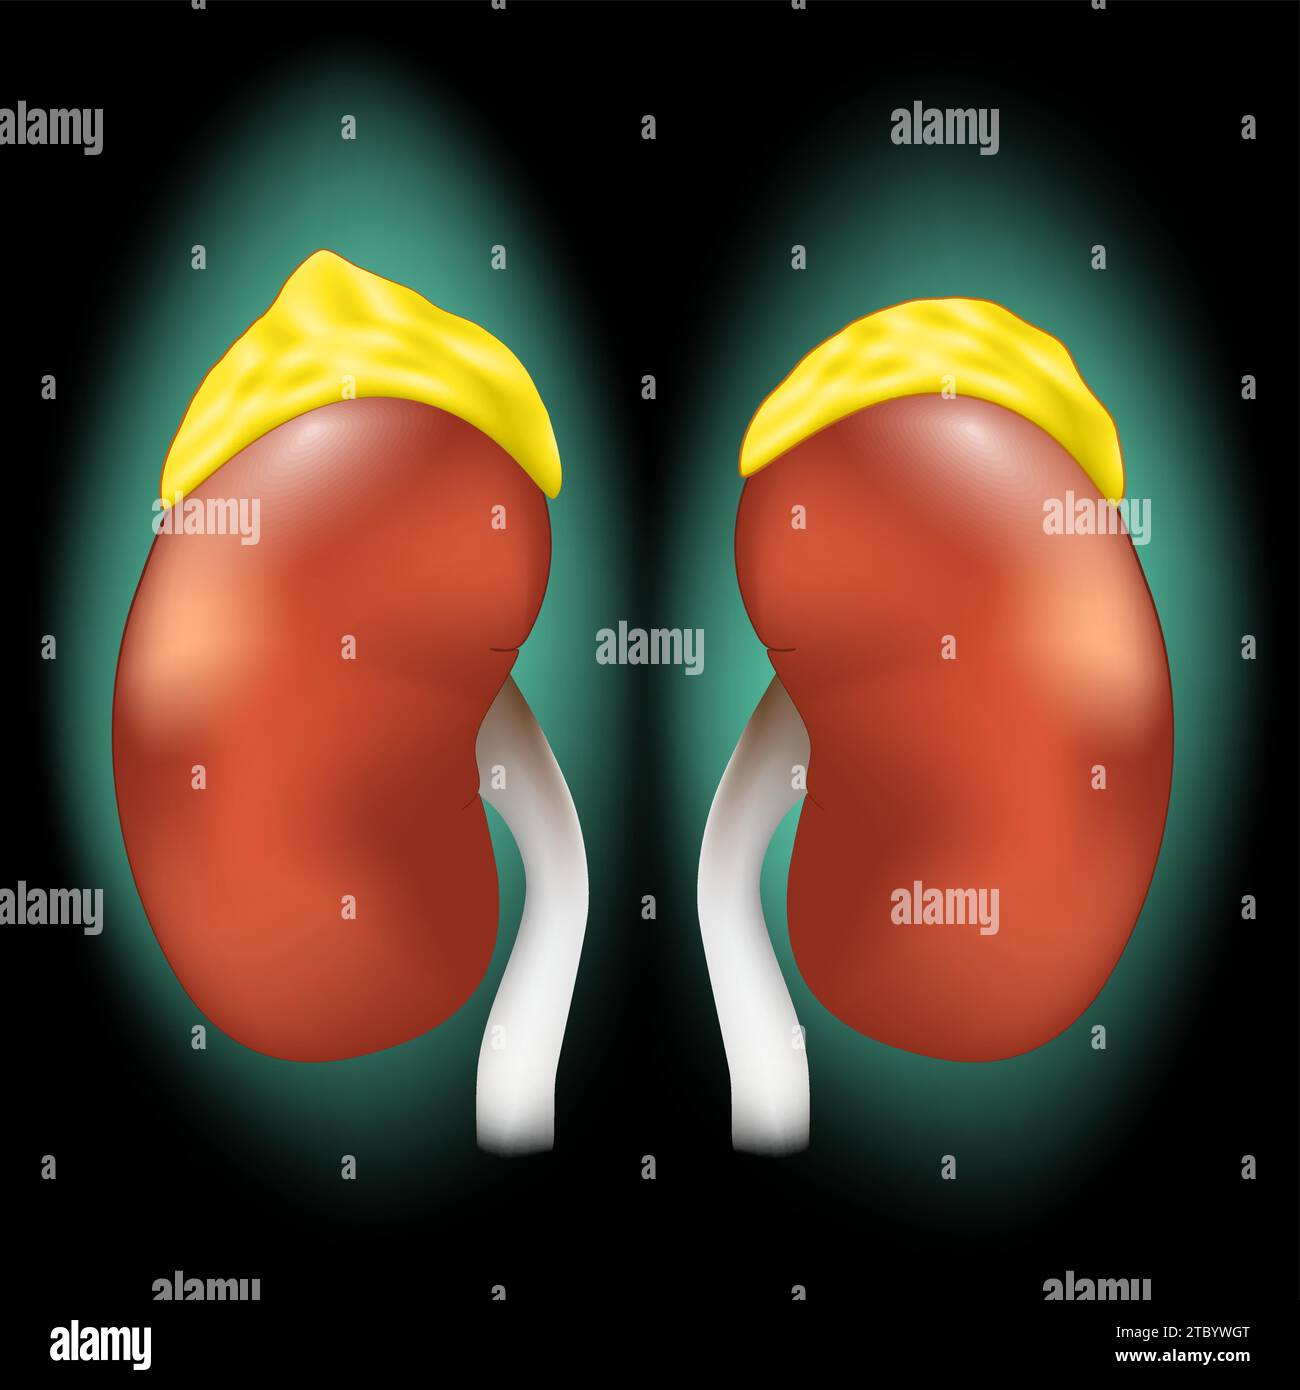 Adrenal glands. Realistic kidneys and suprarenal glands with glowing effect. Endocrine system. Human body anatomy. Image for healthcare design. Vector Stock Vector